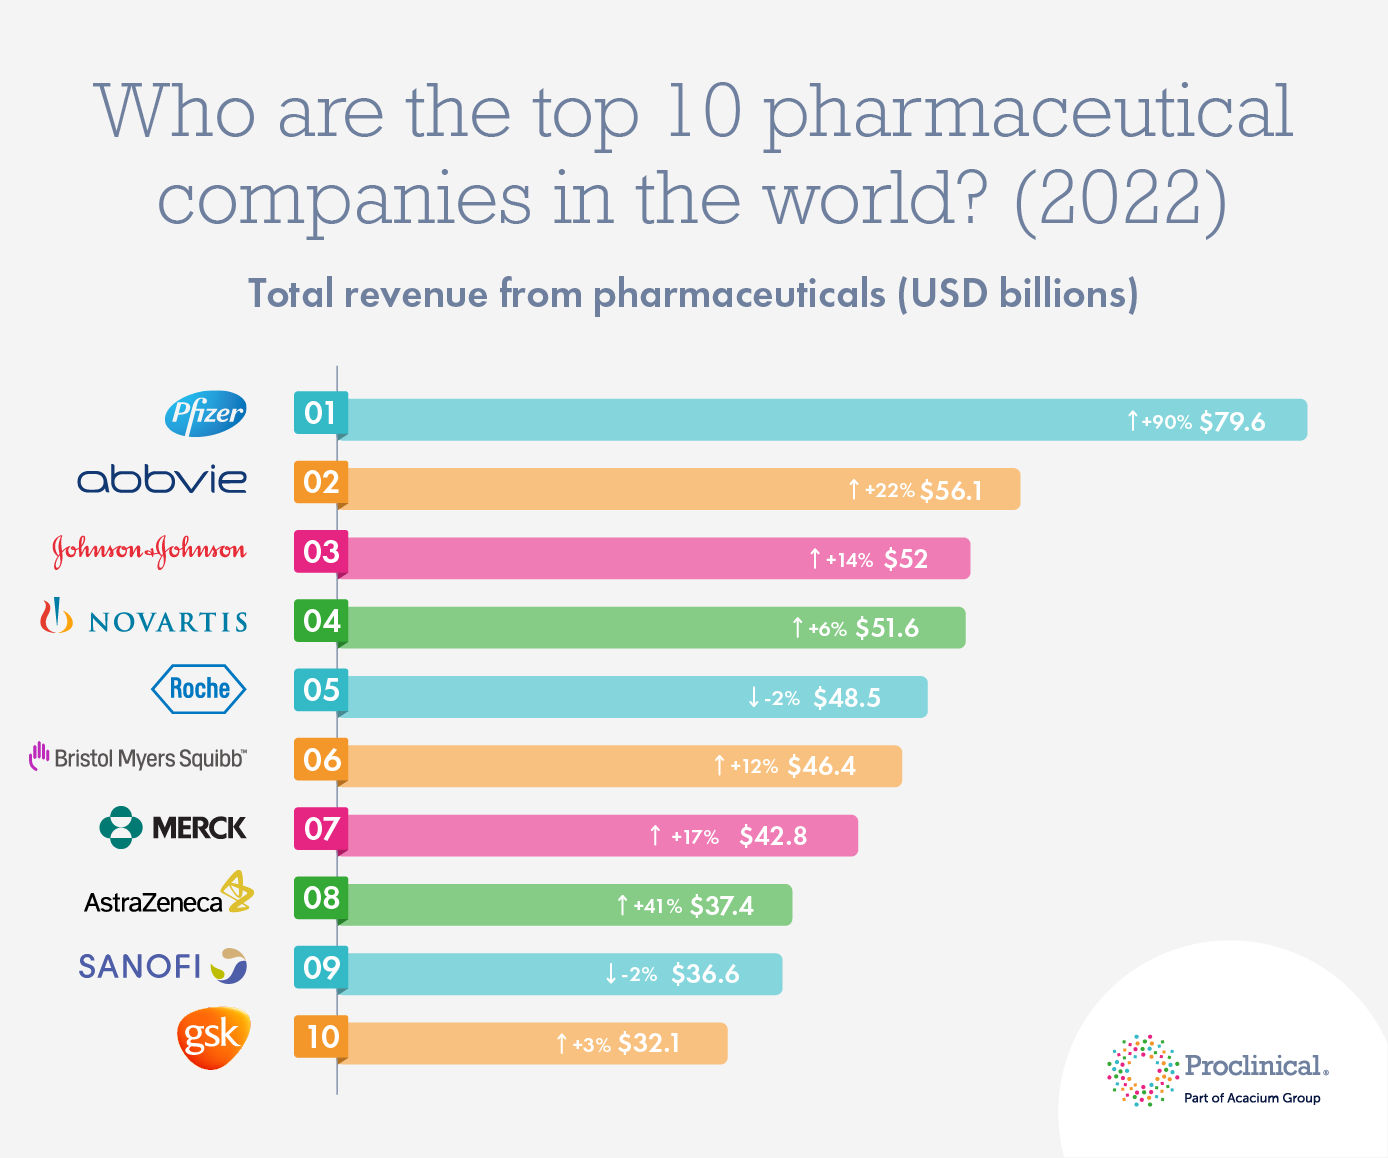 procedure protest at ringe Who are the top 10 pharmaceutical companies in the world (2022)? |  Proclinical Blogs